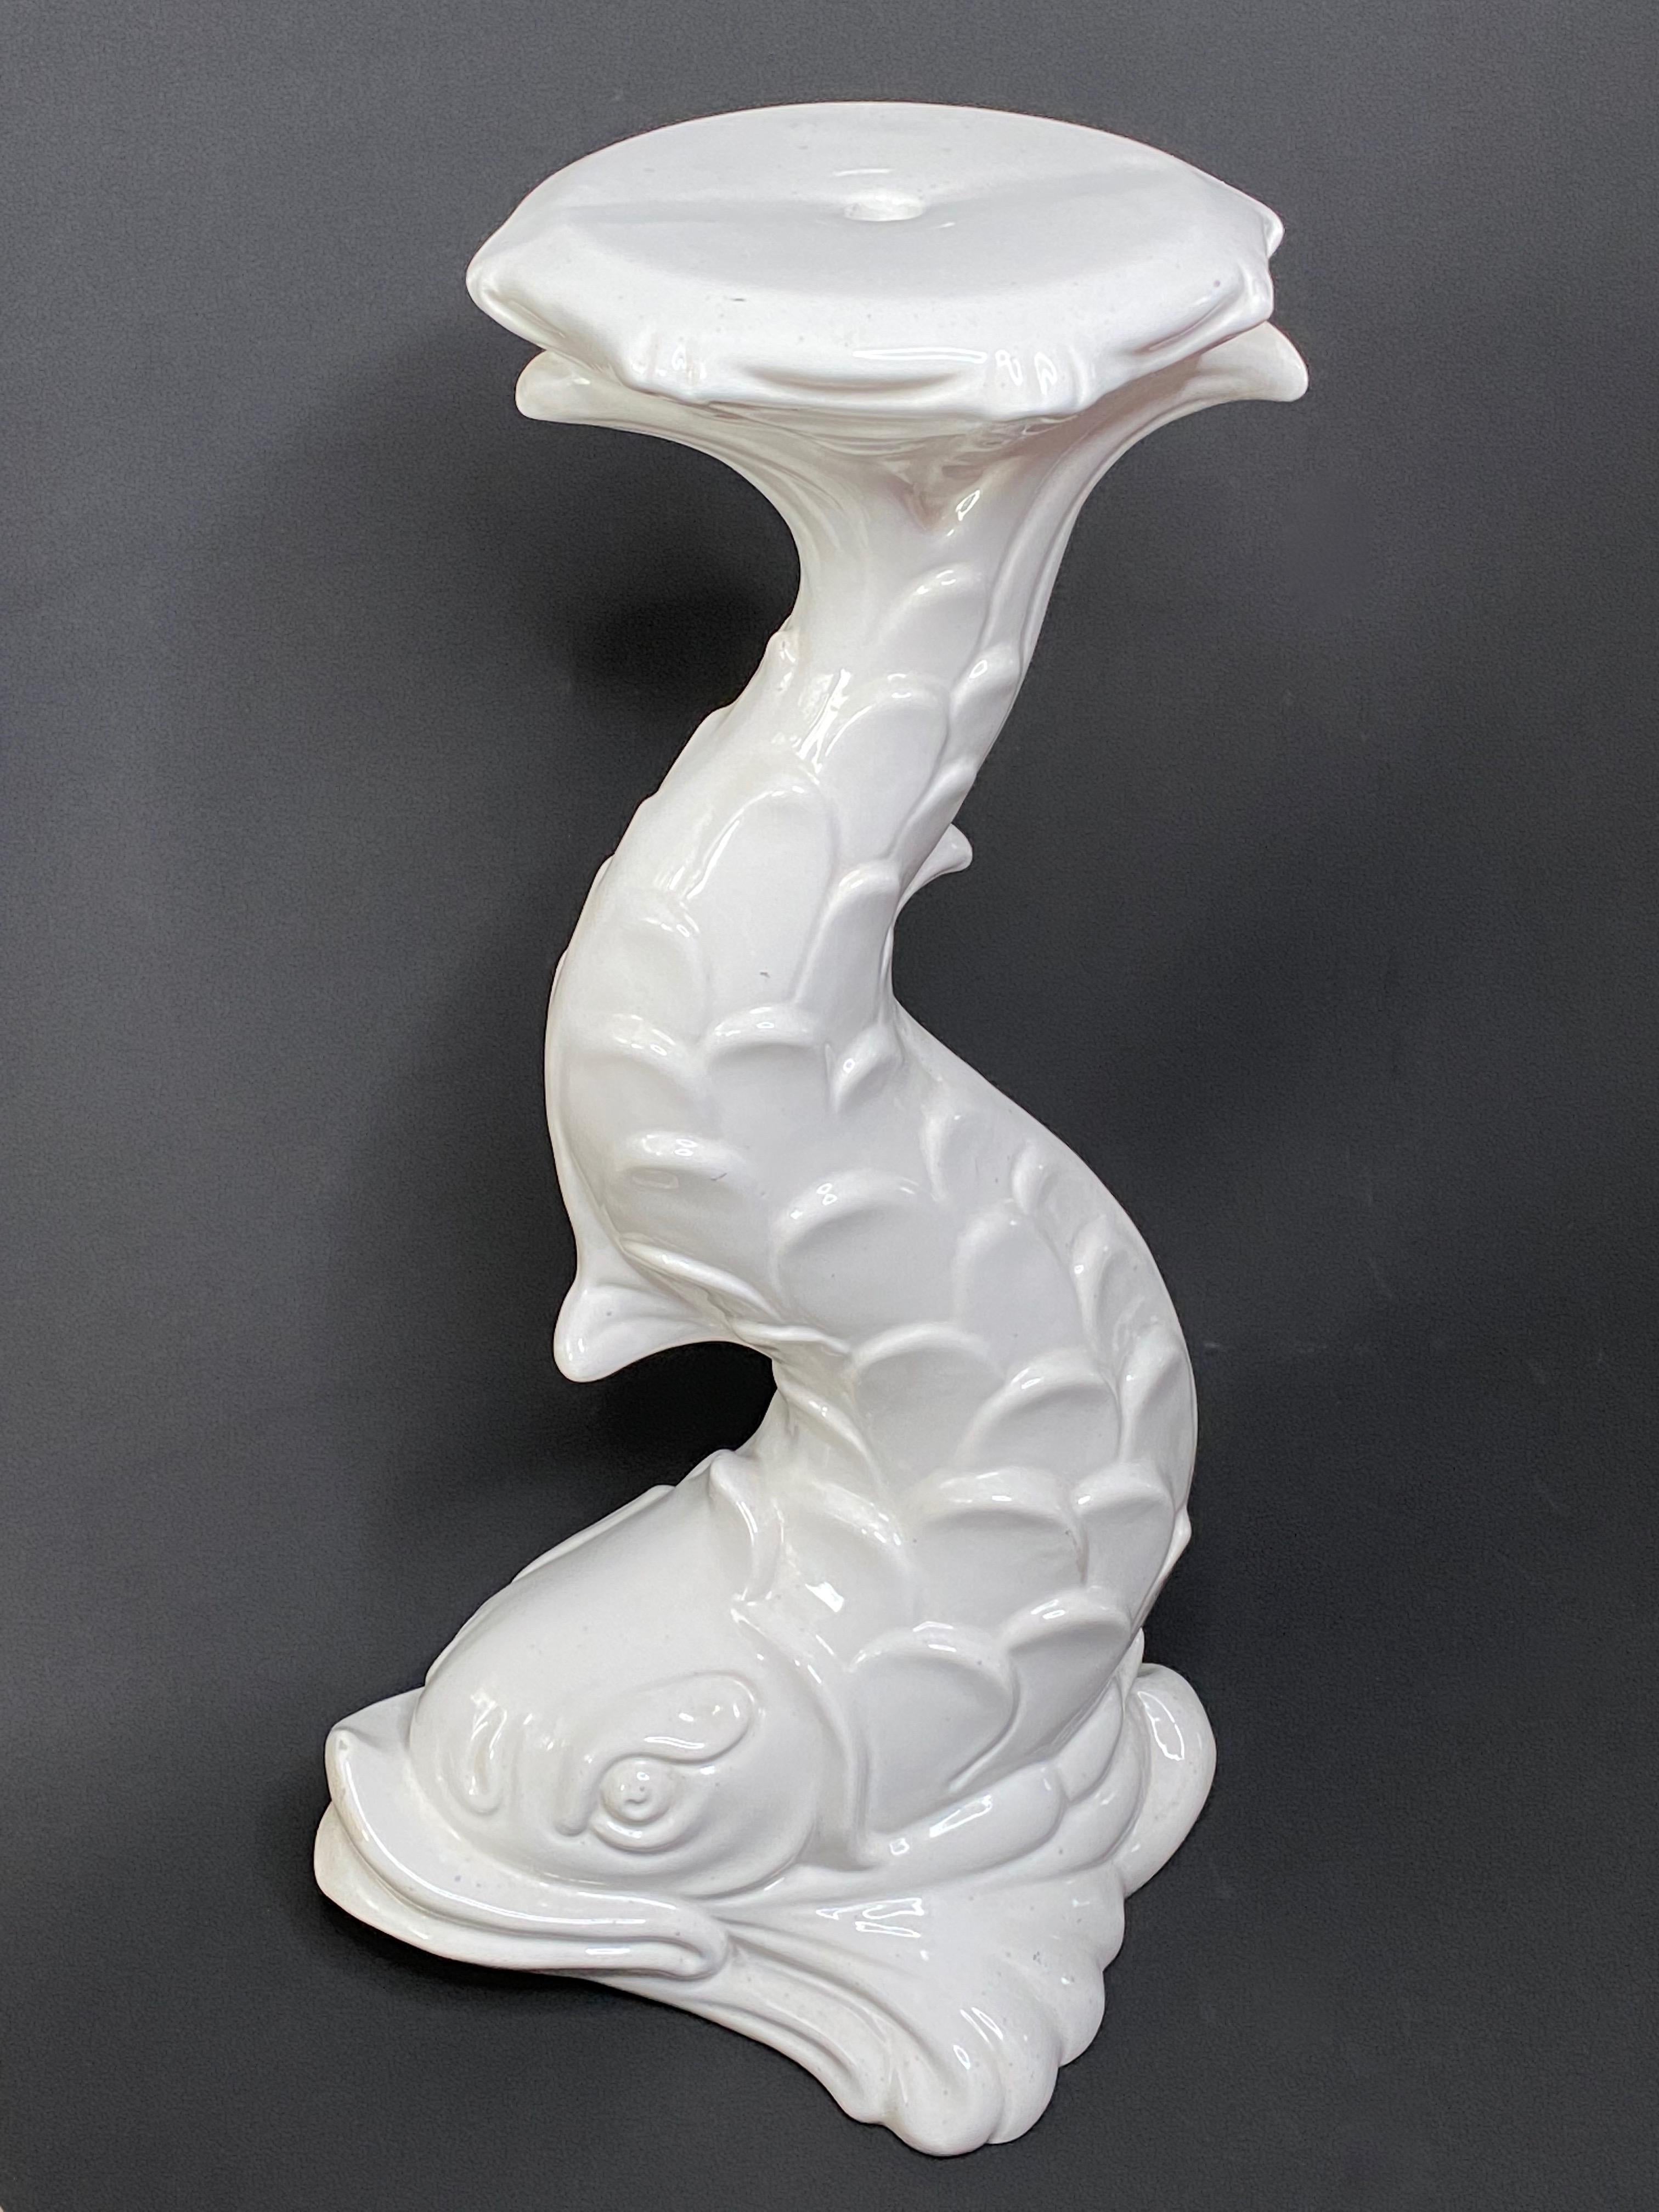 20th century glazed ceramic pedestal plant stand, flower pot seat or table. Handmade of ceramic. Nice addition to your home, patio or garden. This is in used condition, with signs of wear as expected with age and use. Marked Italy.